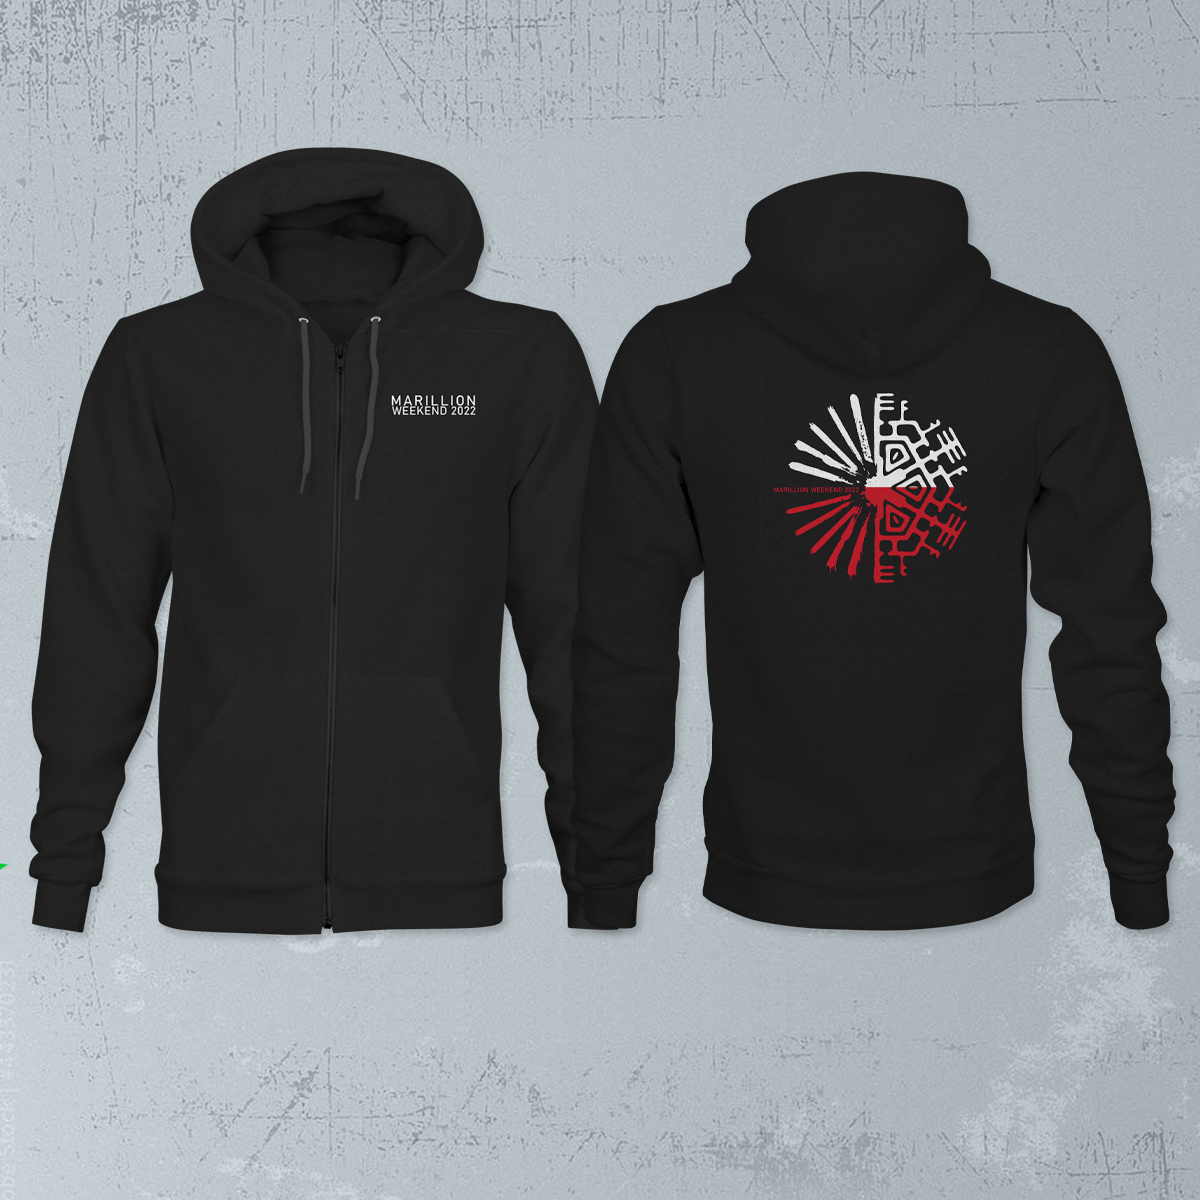 MW 2022 - Poland Pullover Hoodies Black Pullover Hoodie